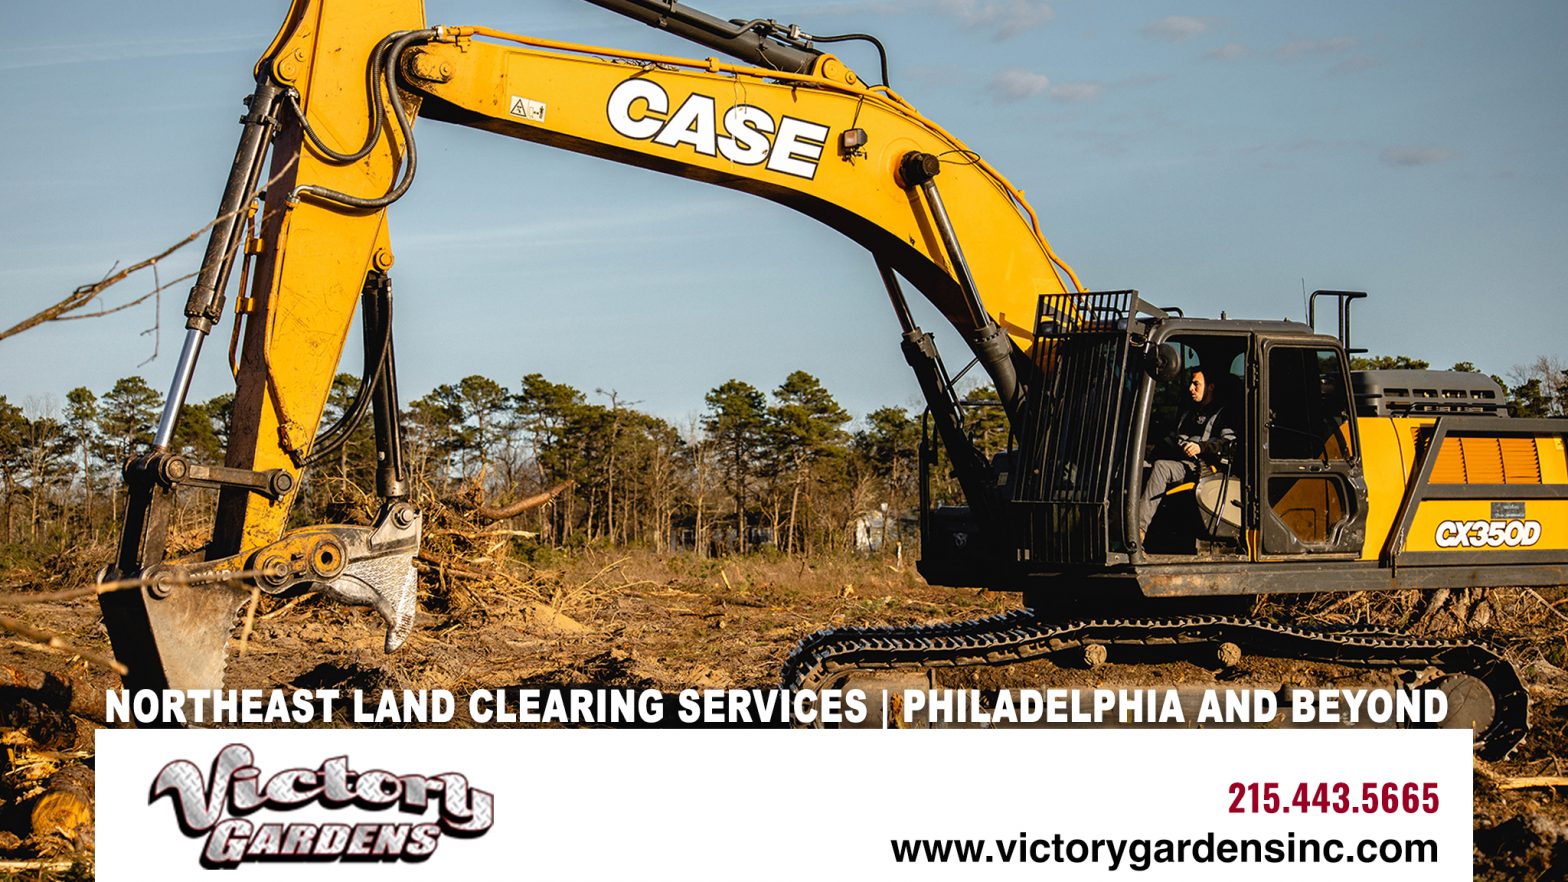 Northeast Land Clearing Services